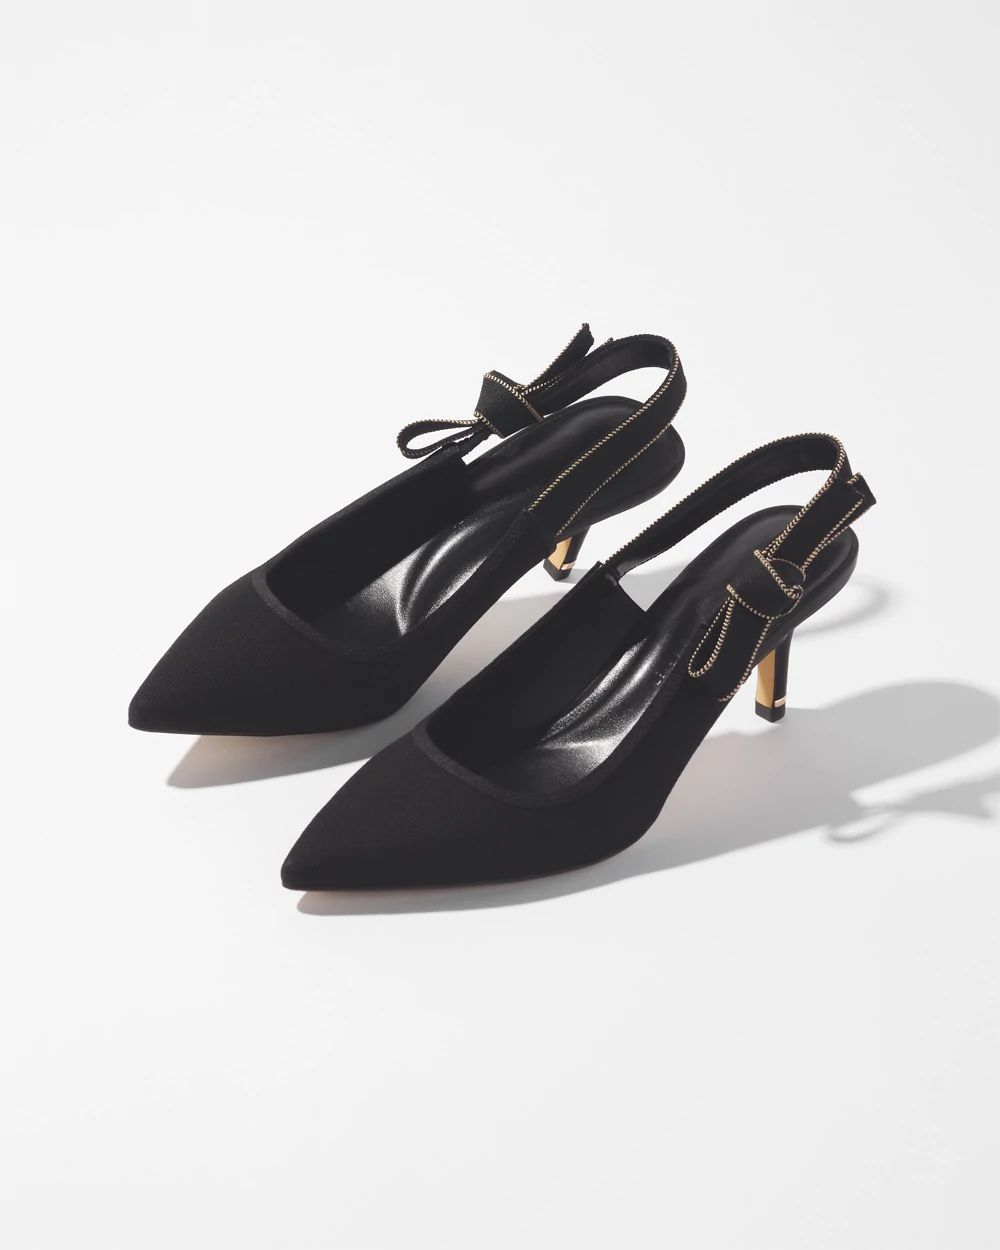 Black Bow Slingback Heels click to view larger image.